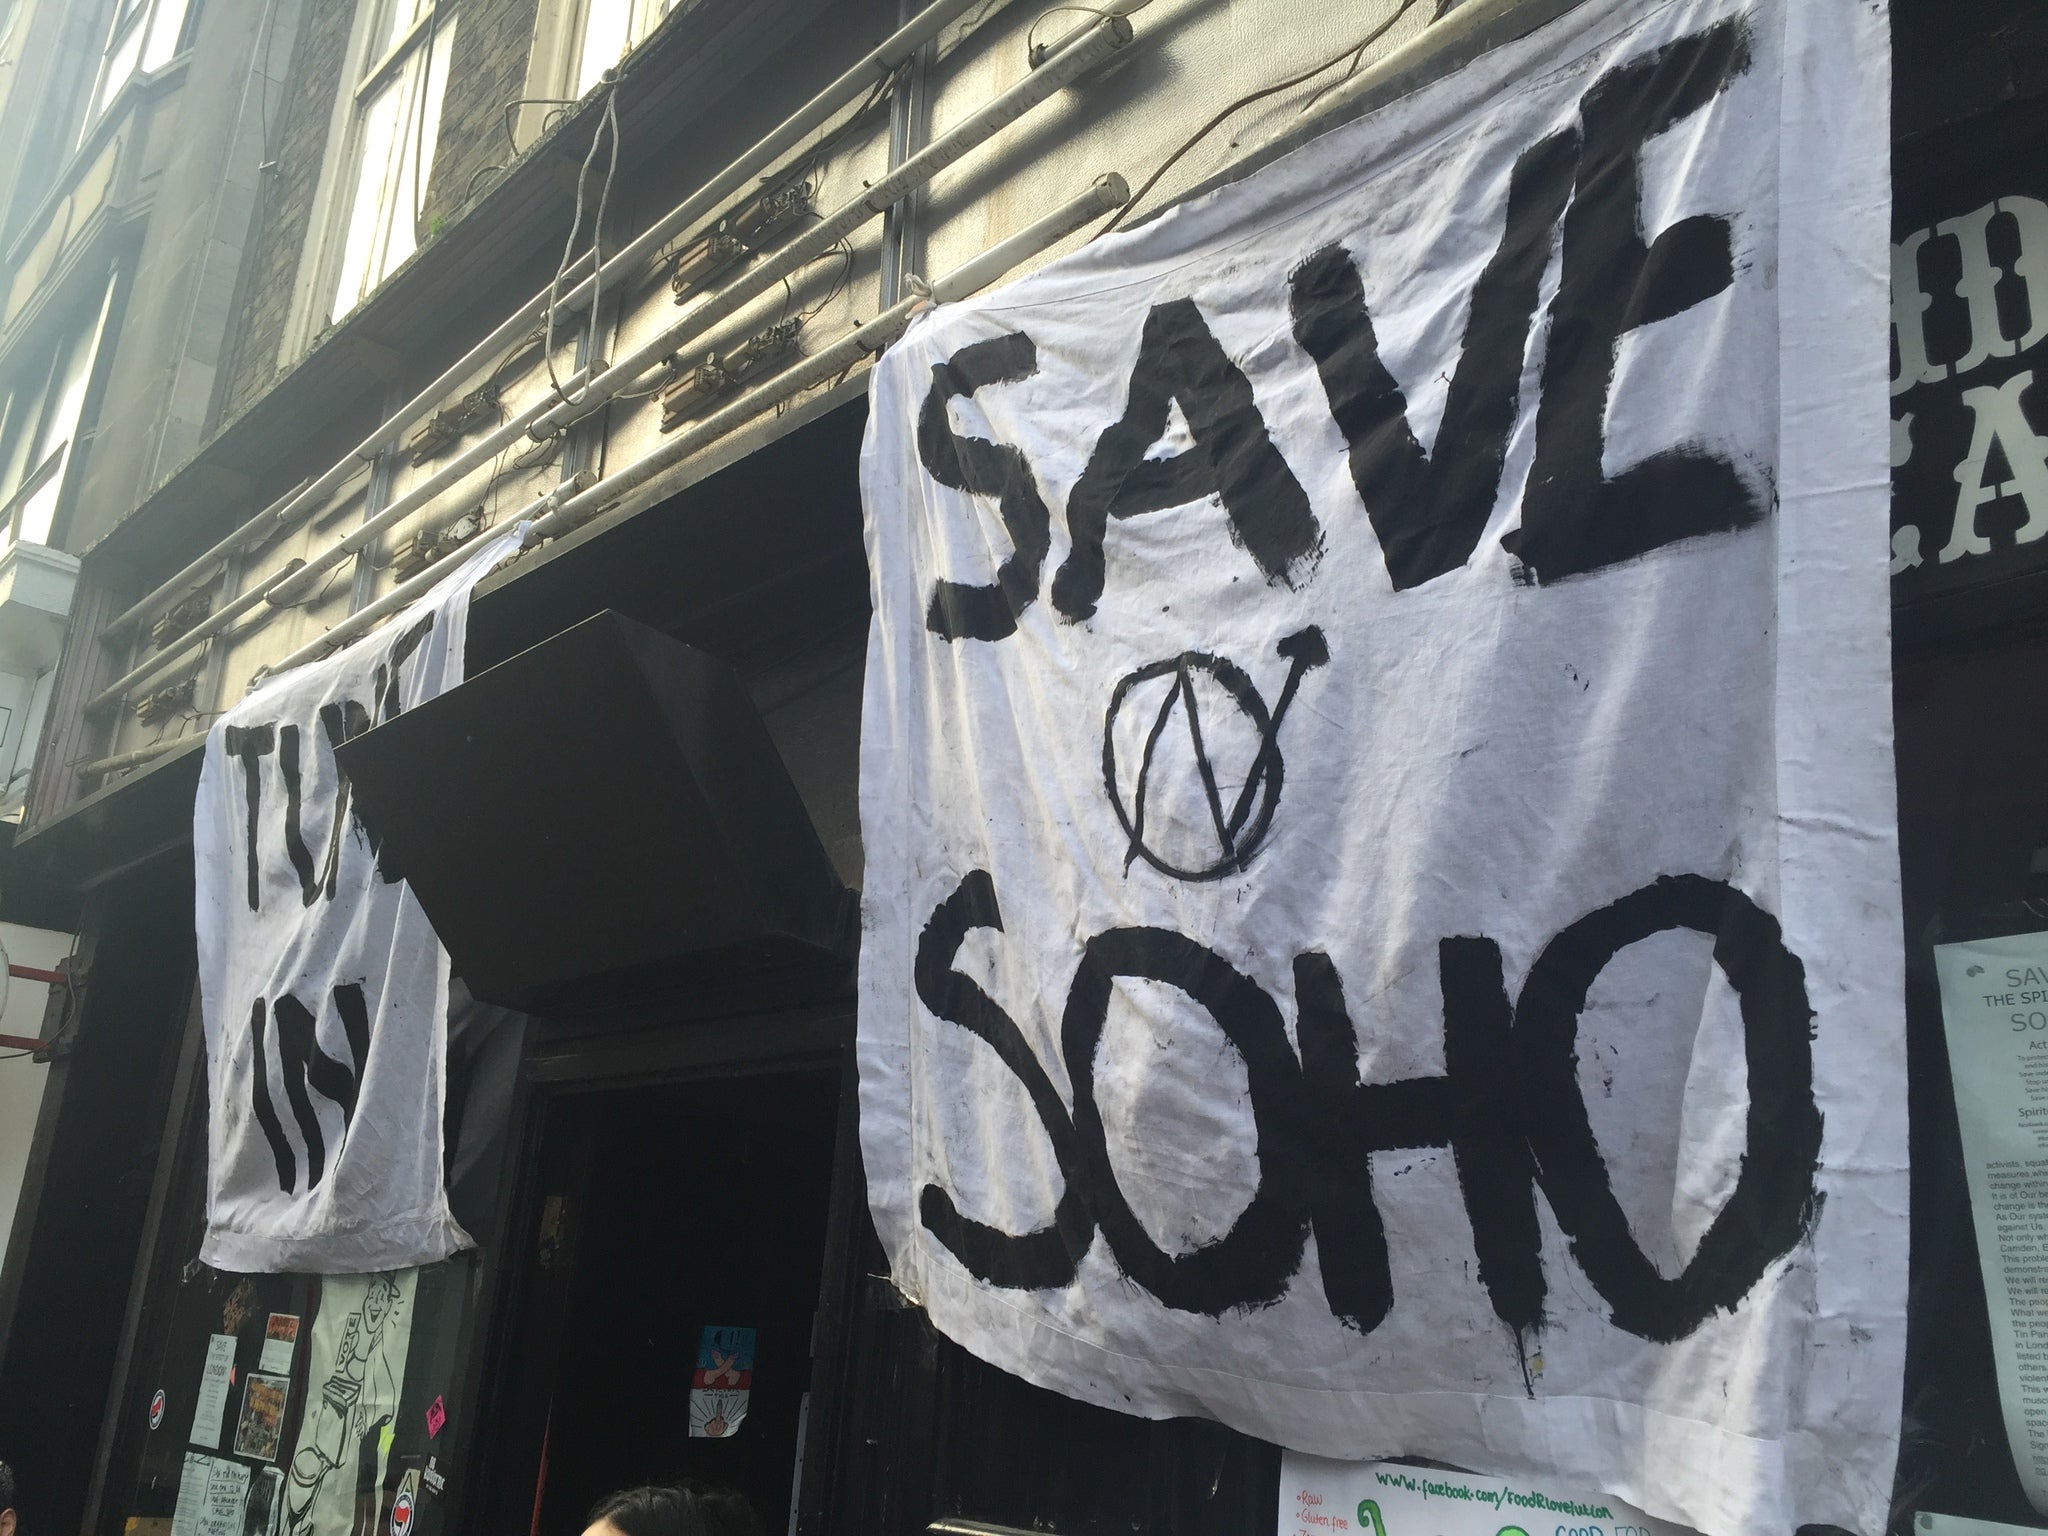 Squatters at 12 Bar are fighting demolition plans in court